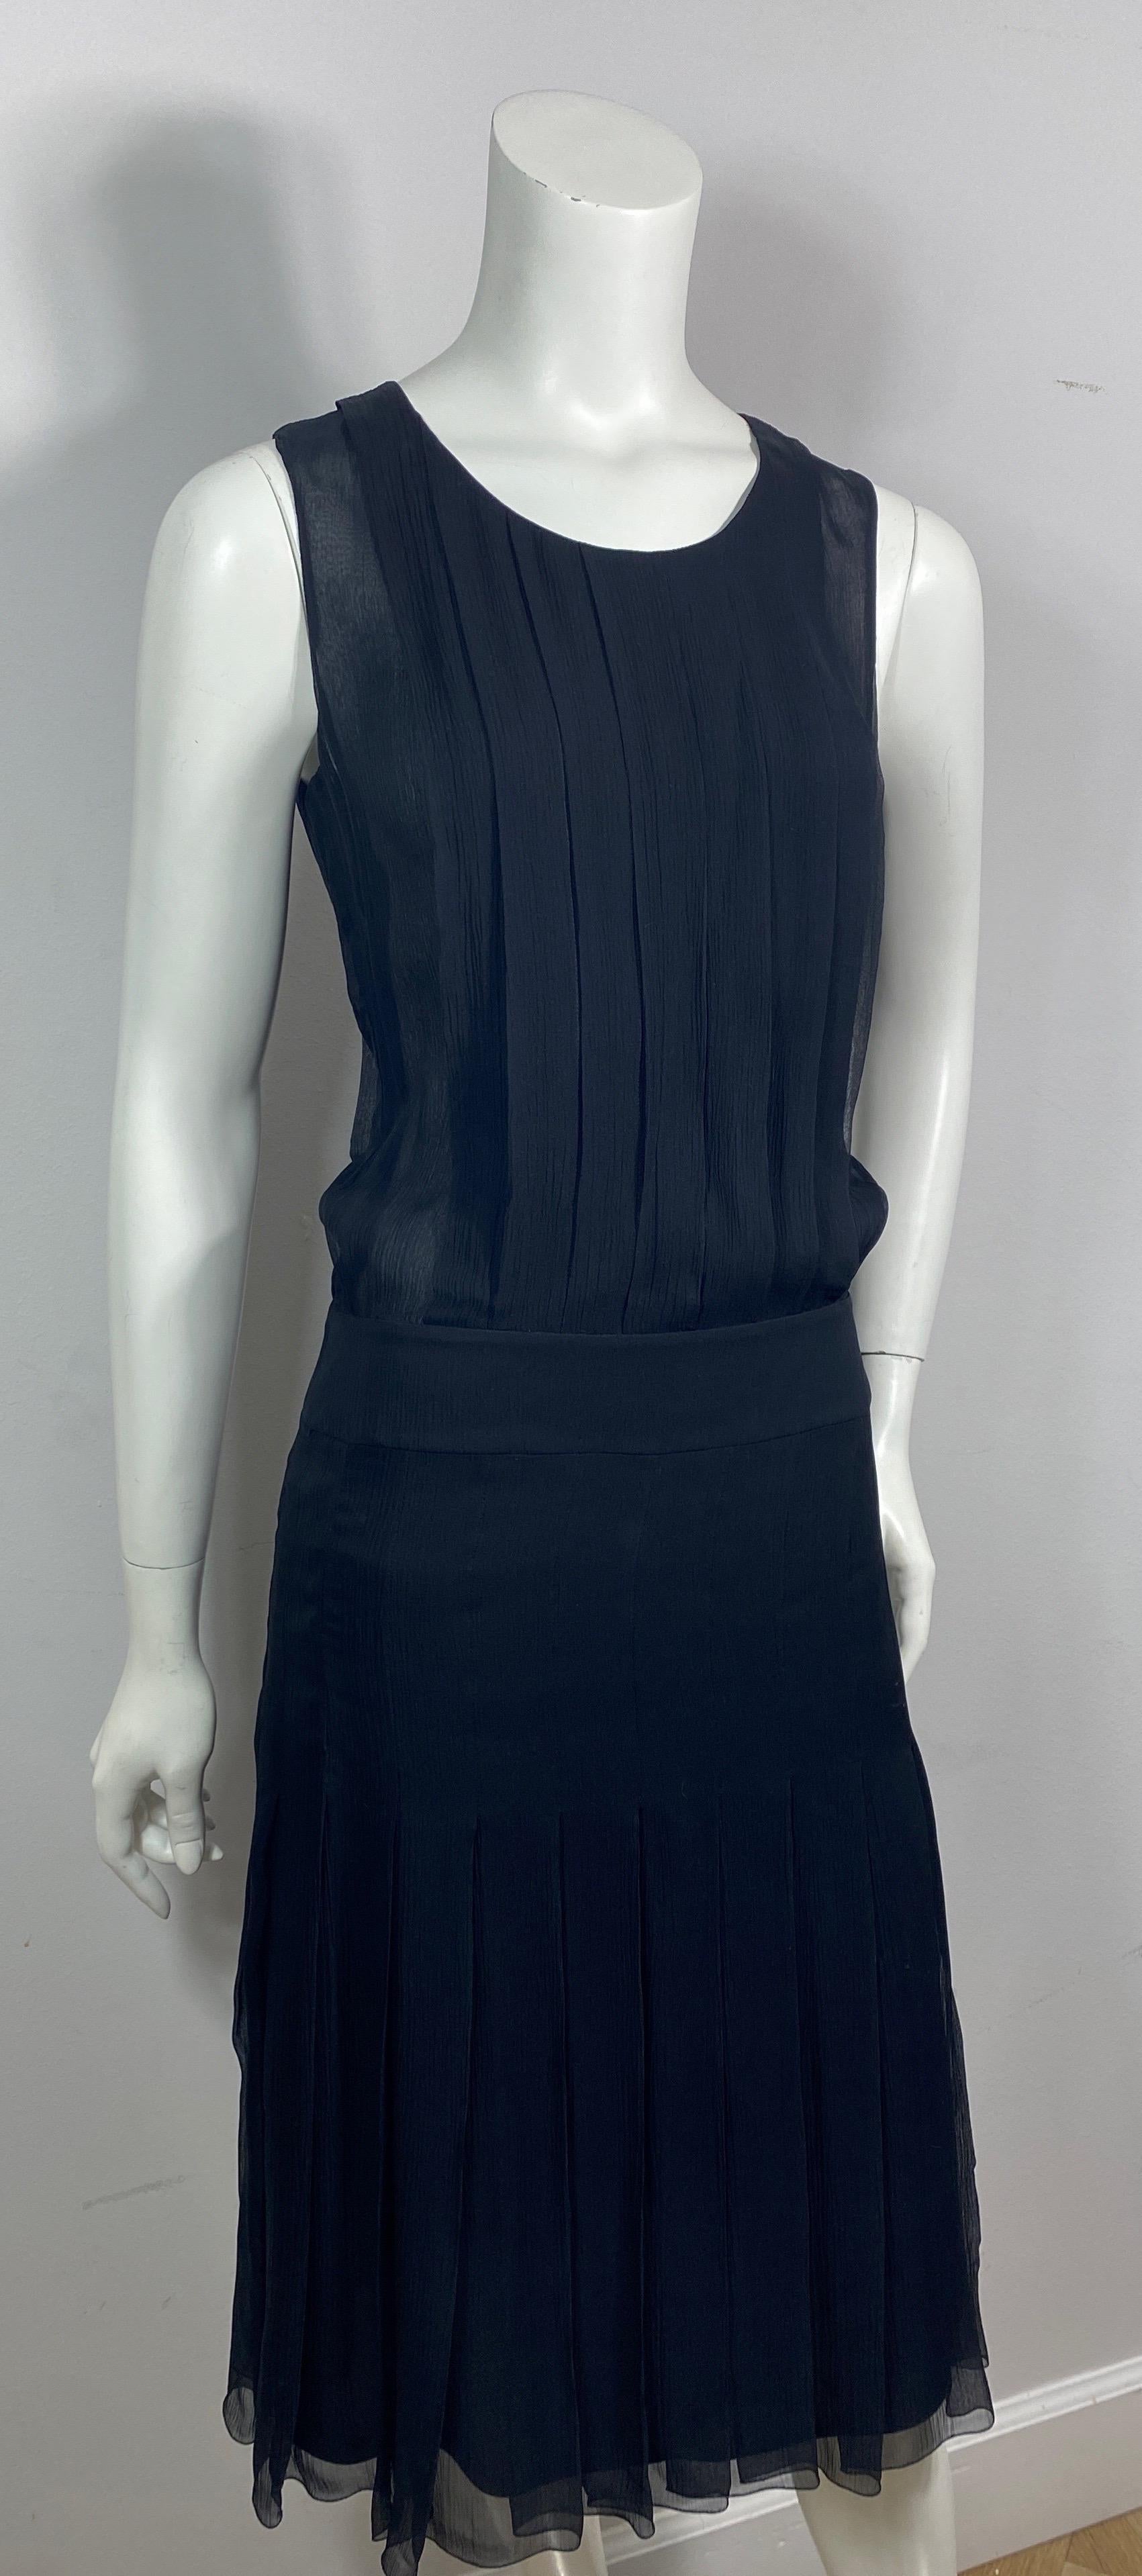 Chanel 2006C Black Silk Chiffon Sleeveless Dress-Size 40 In Good Condition For Sale In West Palm Beach, FL